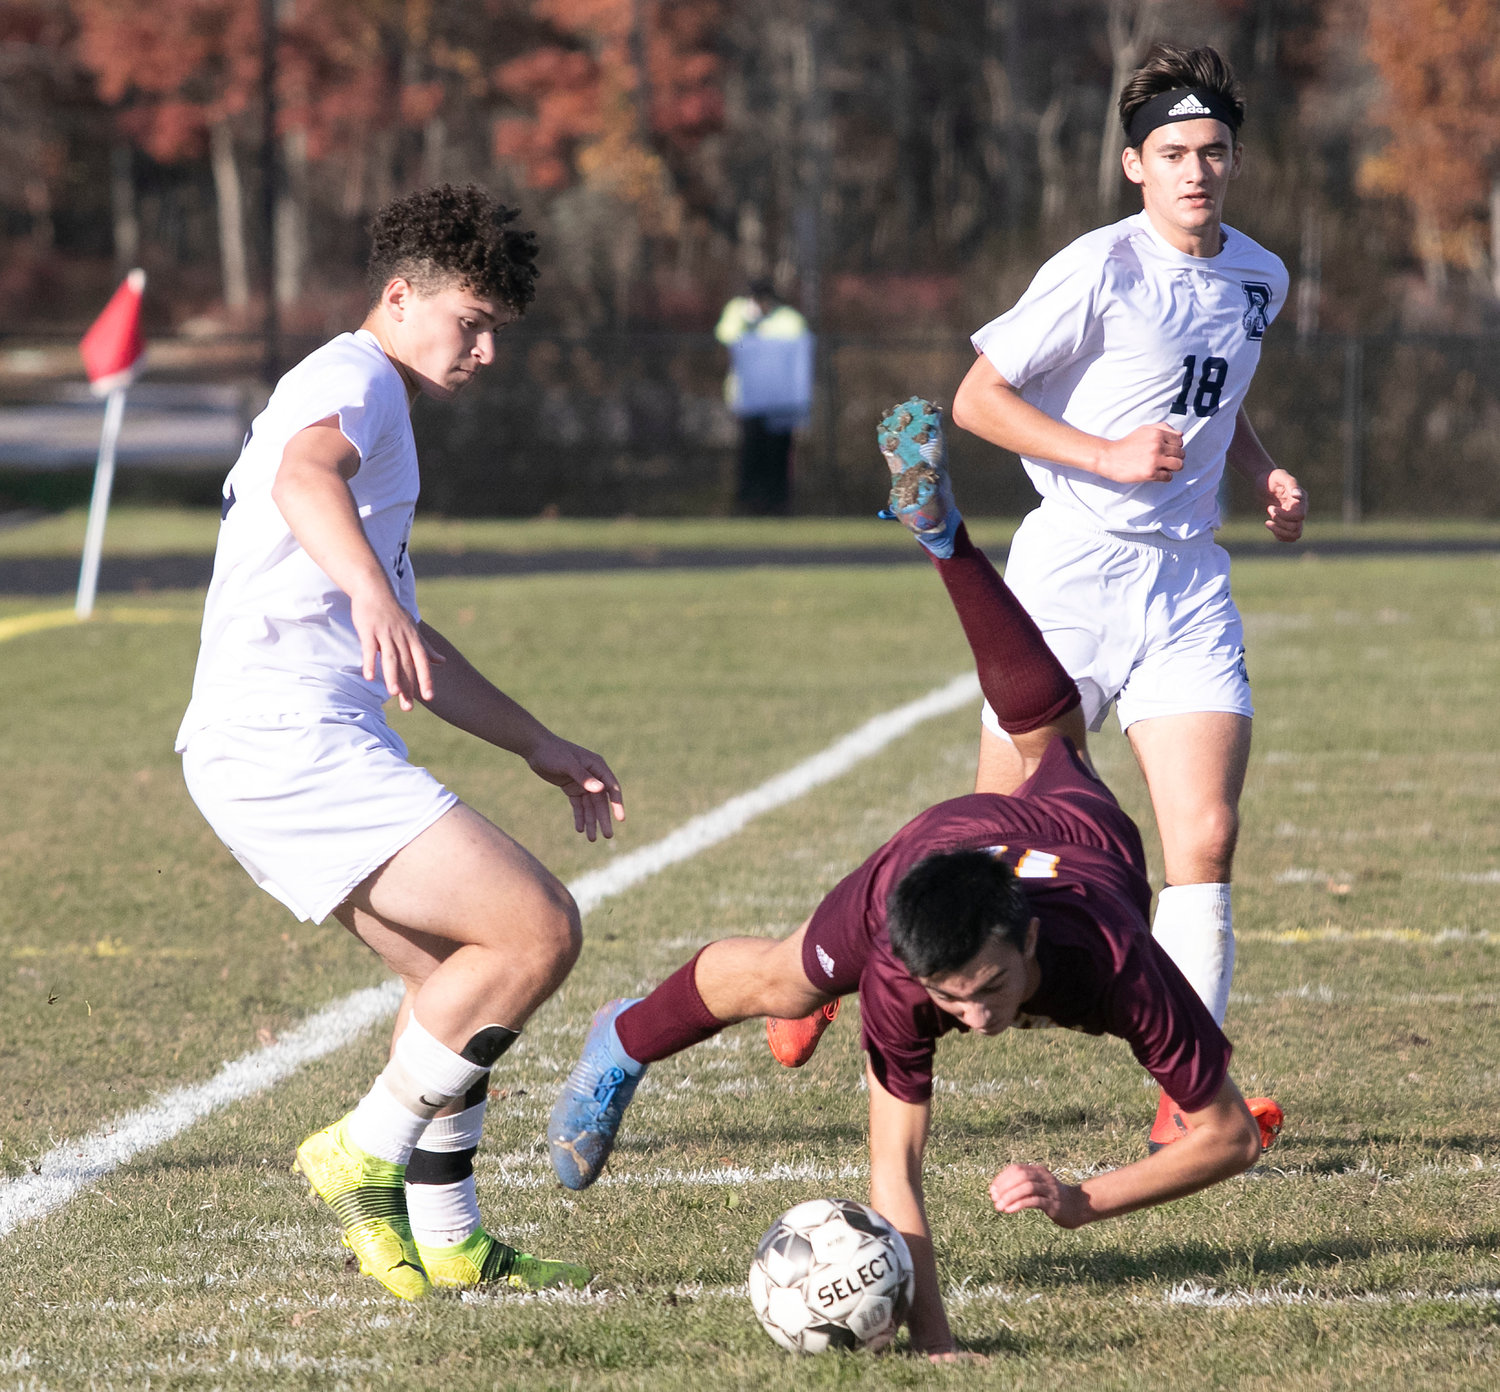 Midfielder Connor Nobrega is upended while dribbling up field in the second half.